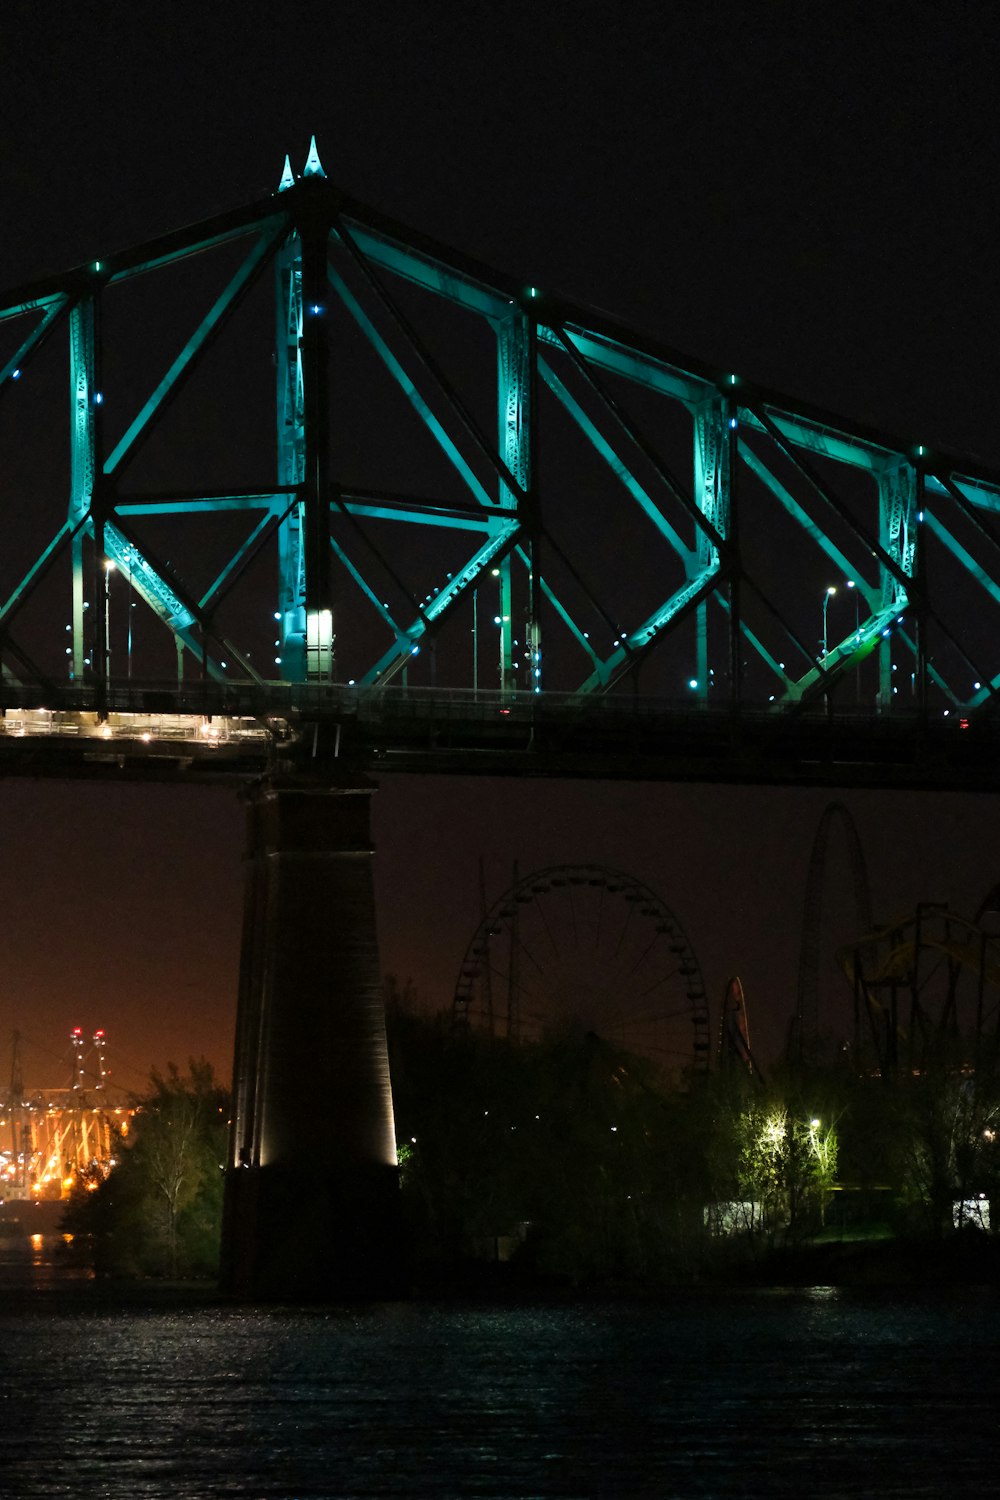 a bridge lit up at night with a ferris wheel in the background